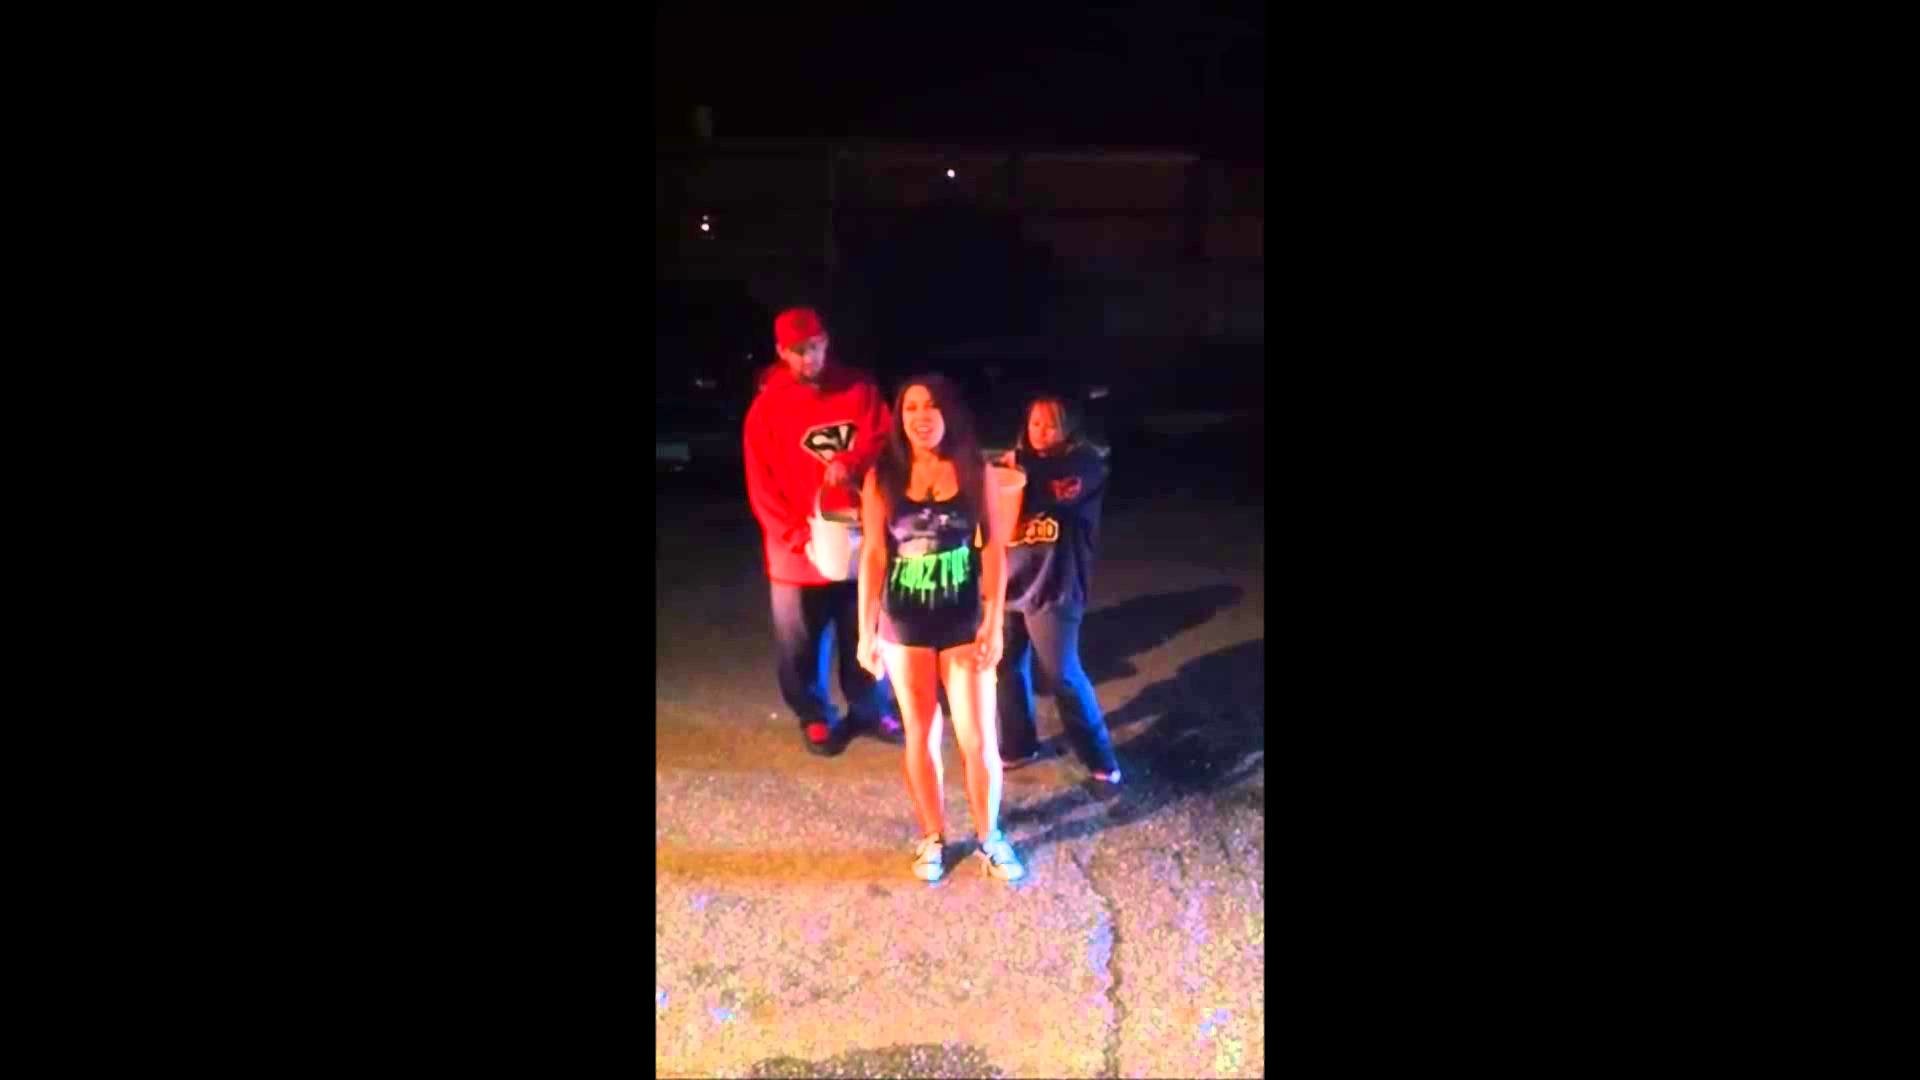 1920x1080 Miss Juggalette 2014: Queen Dominique responds to the Faygo Ice Bucket  challenge! - YouTube